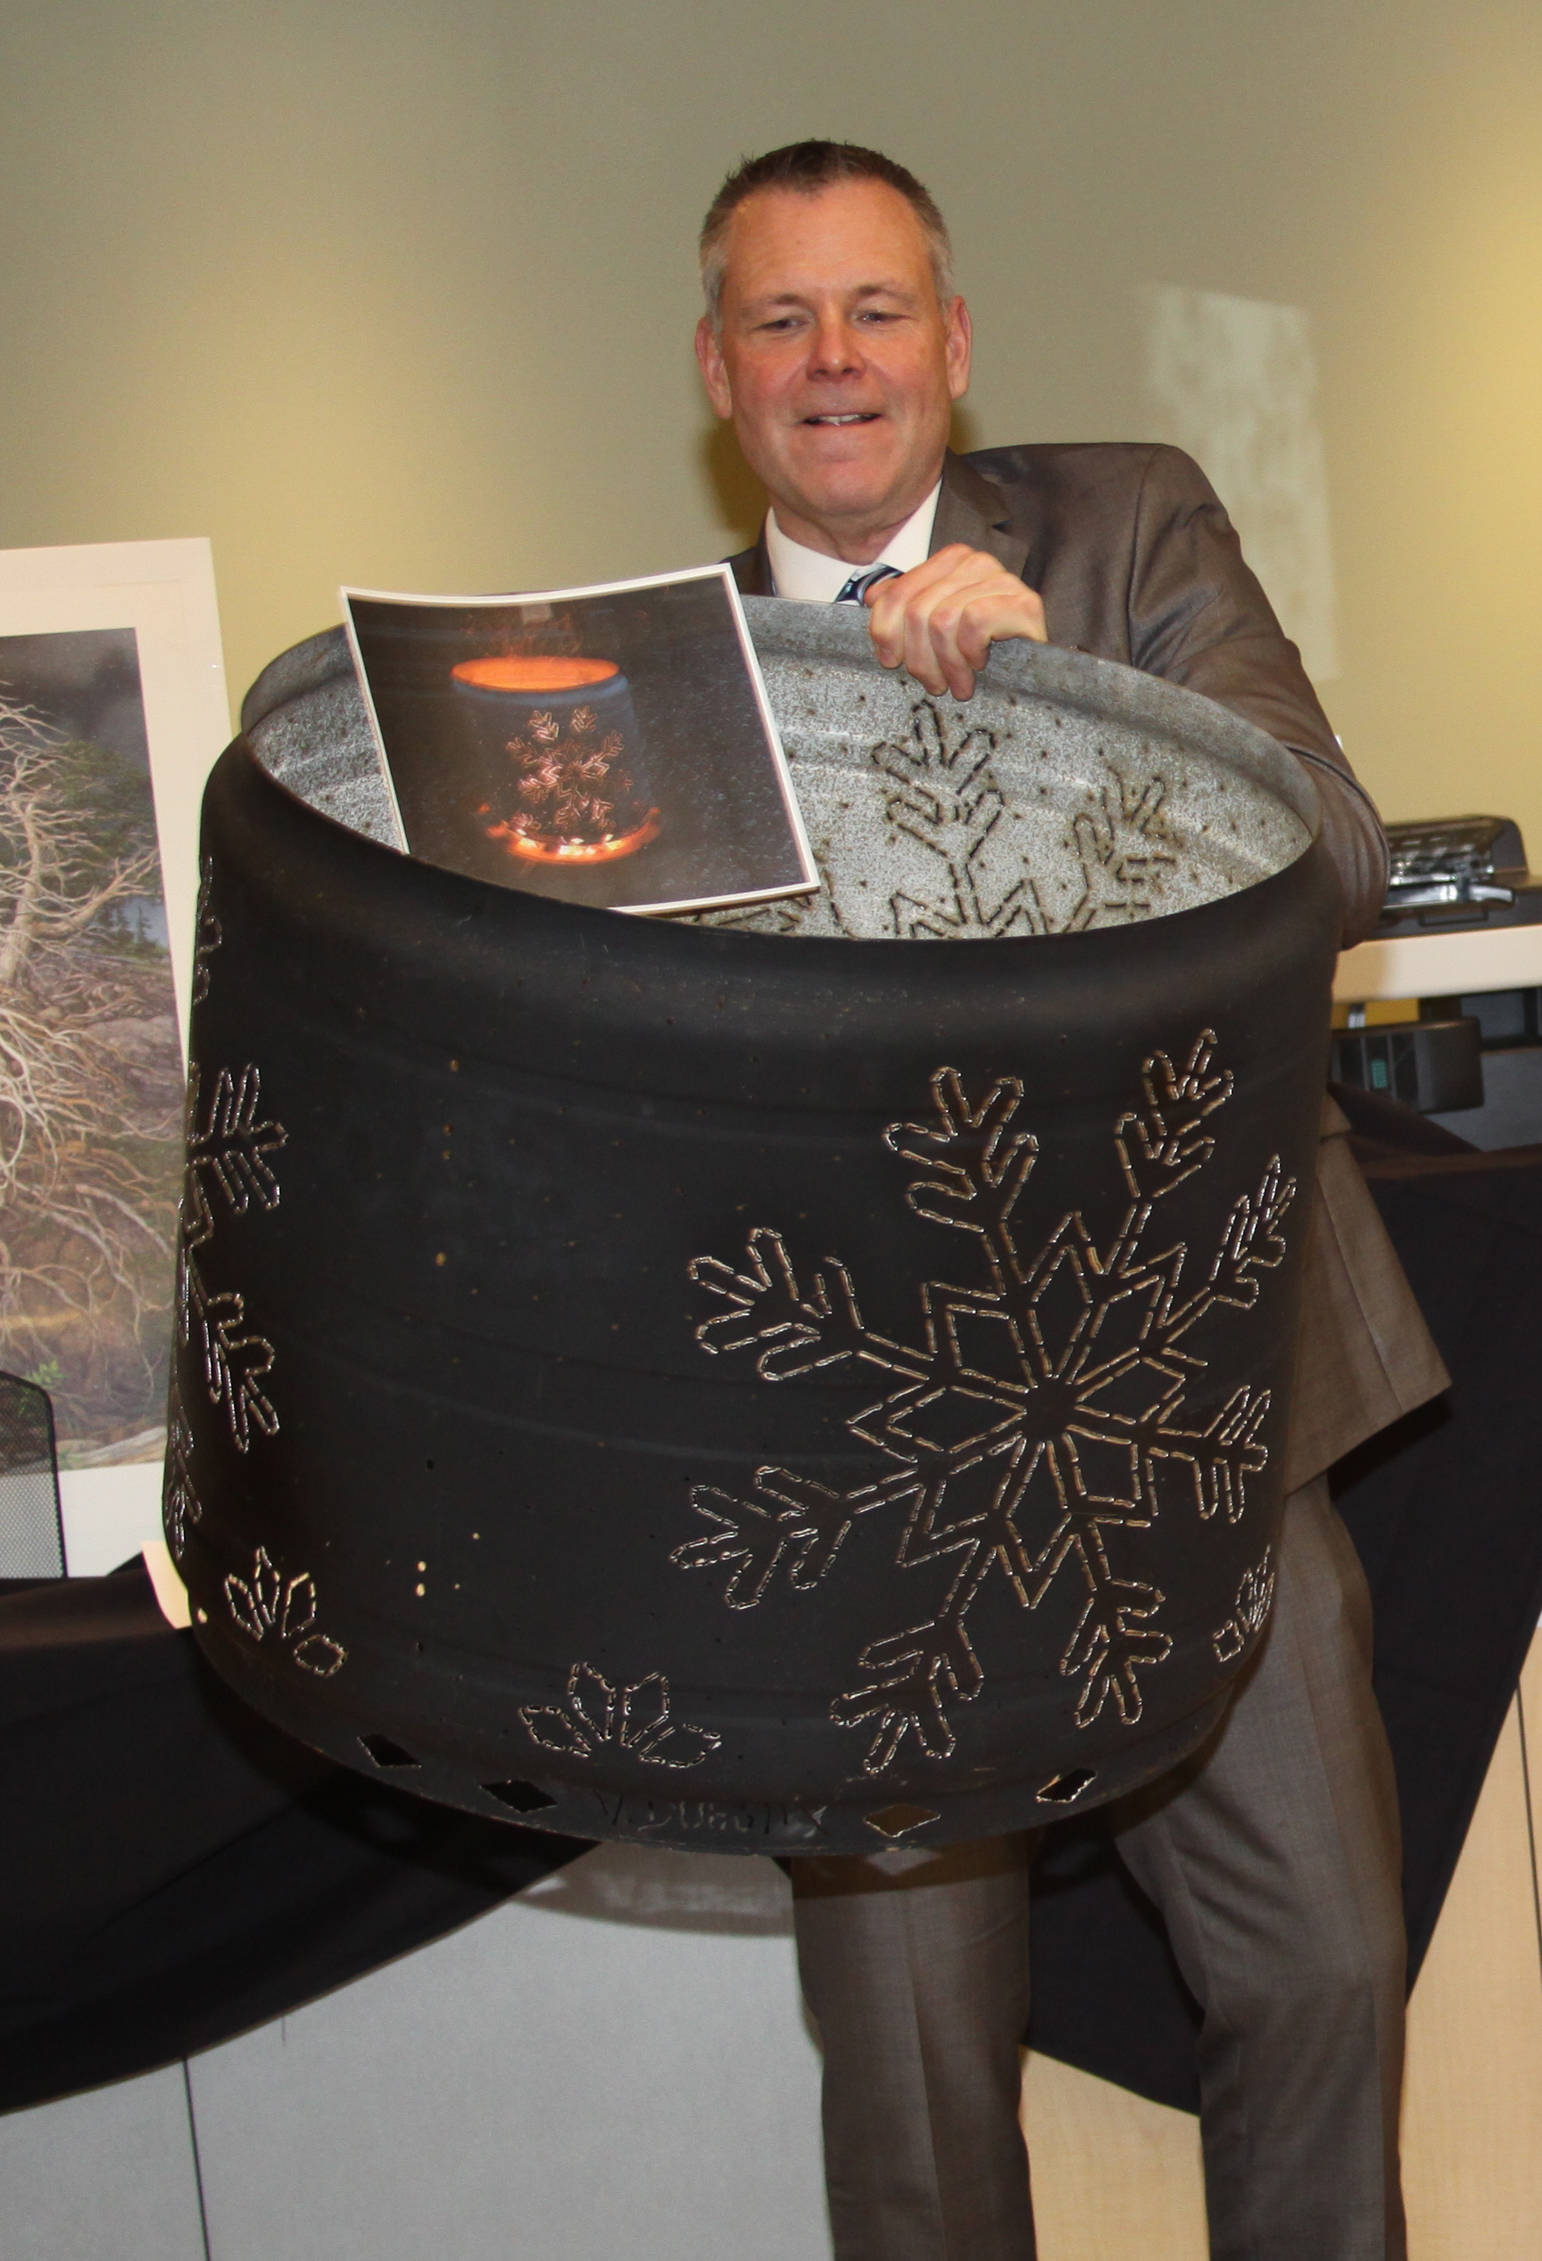 CPH Finance Director Bruce Richards holds an artistic burn barrel up for bid at Evening by the River.